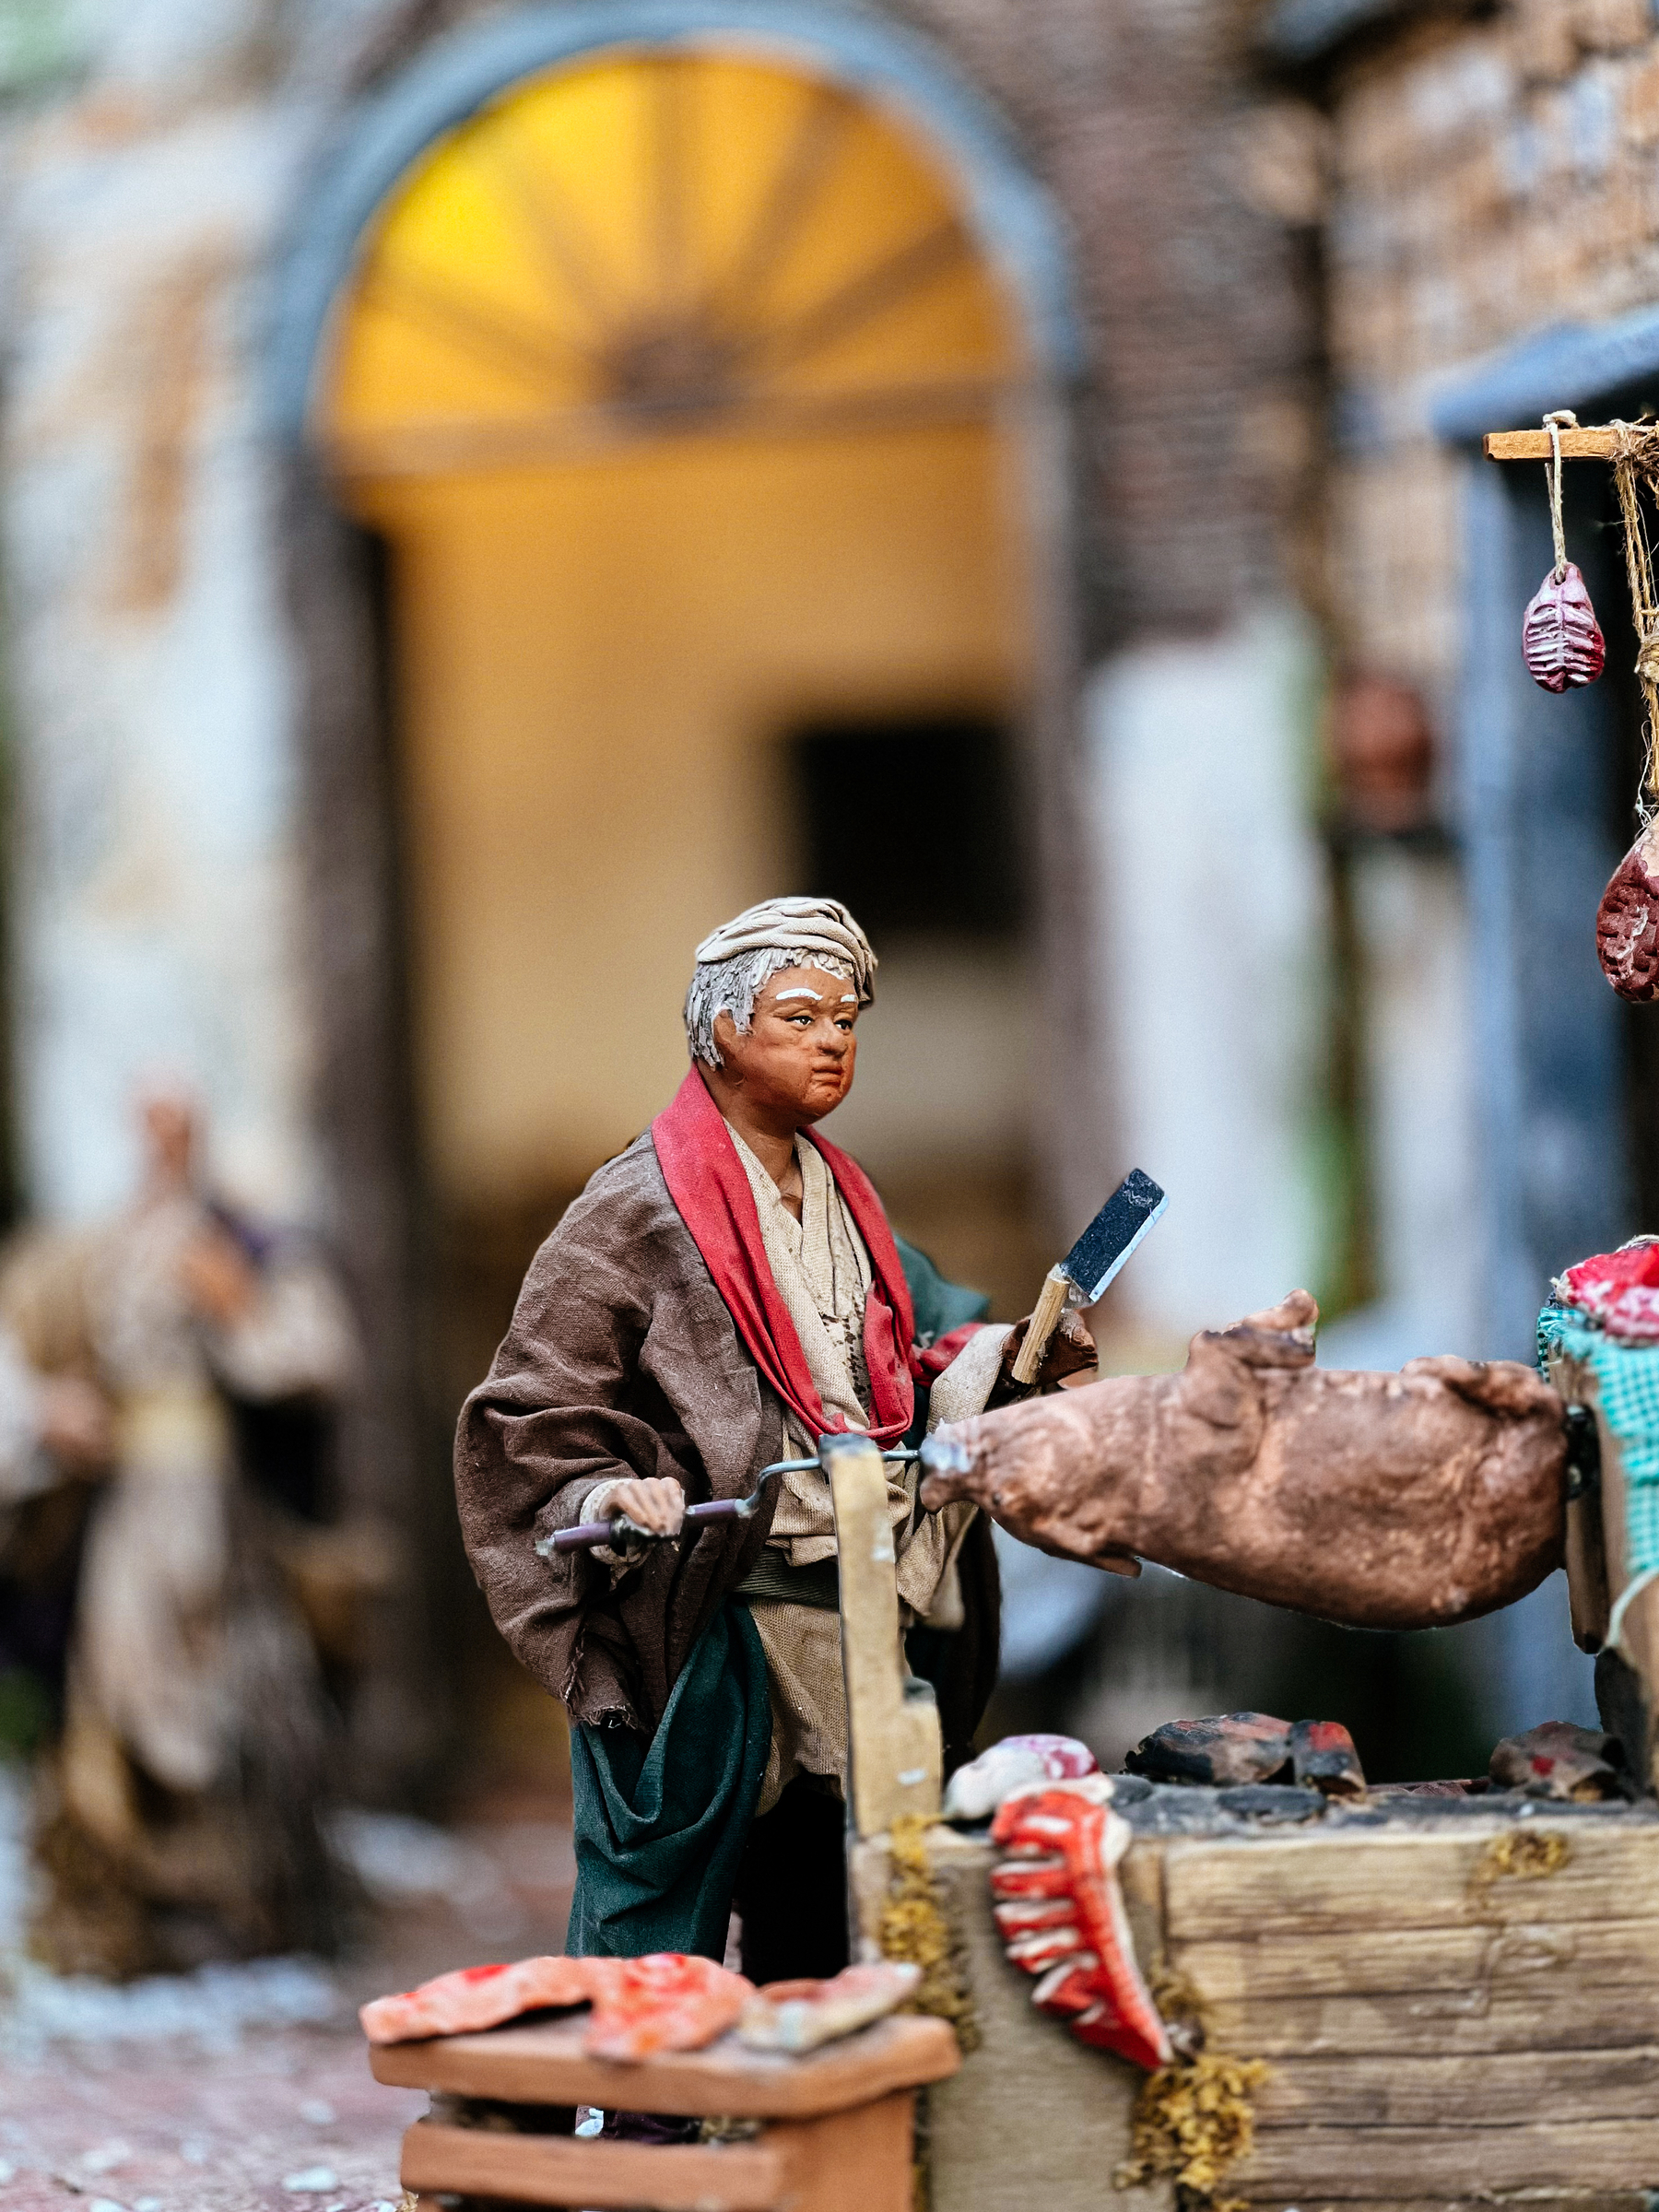 A character in a nativity scene. A man with a roasting pig. 